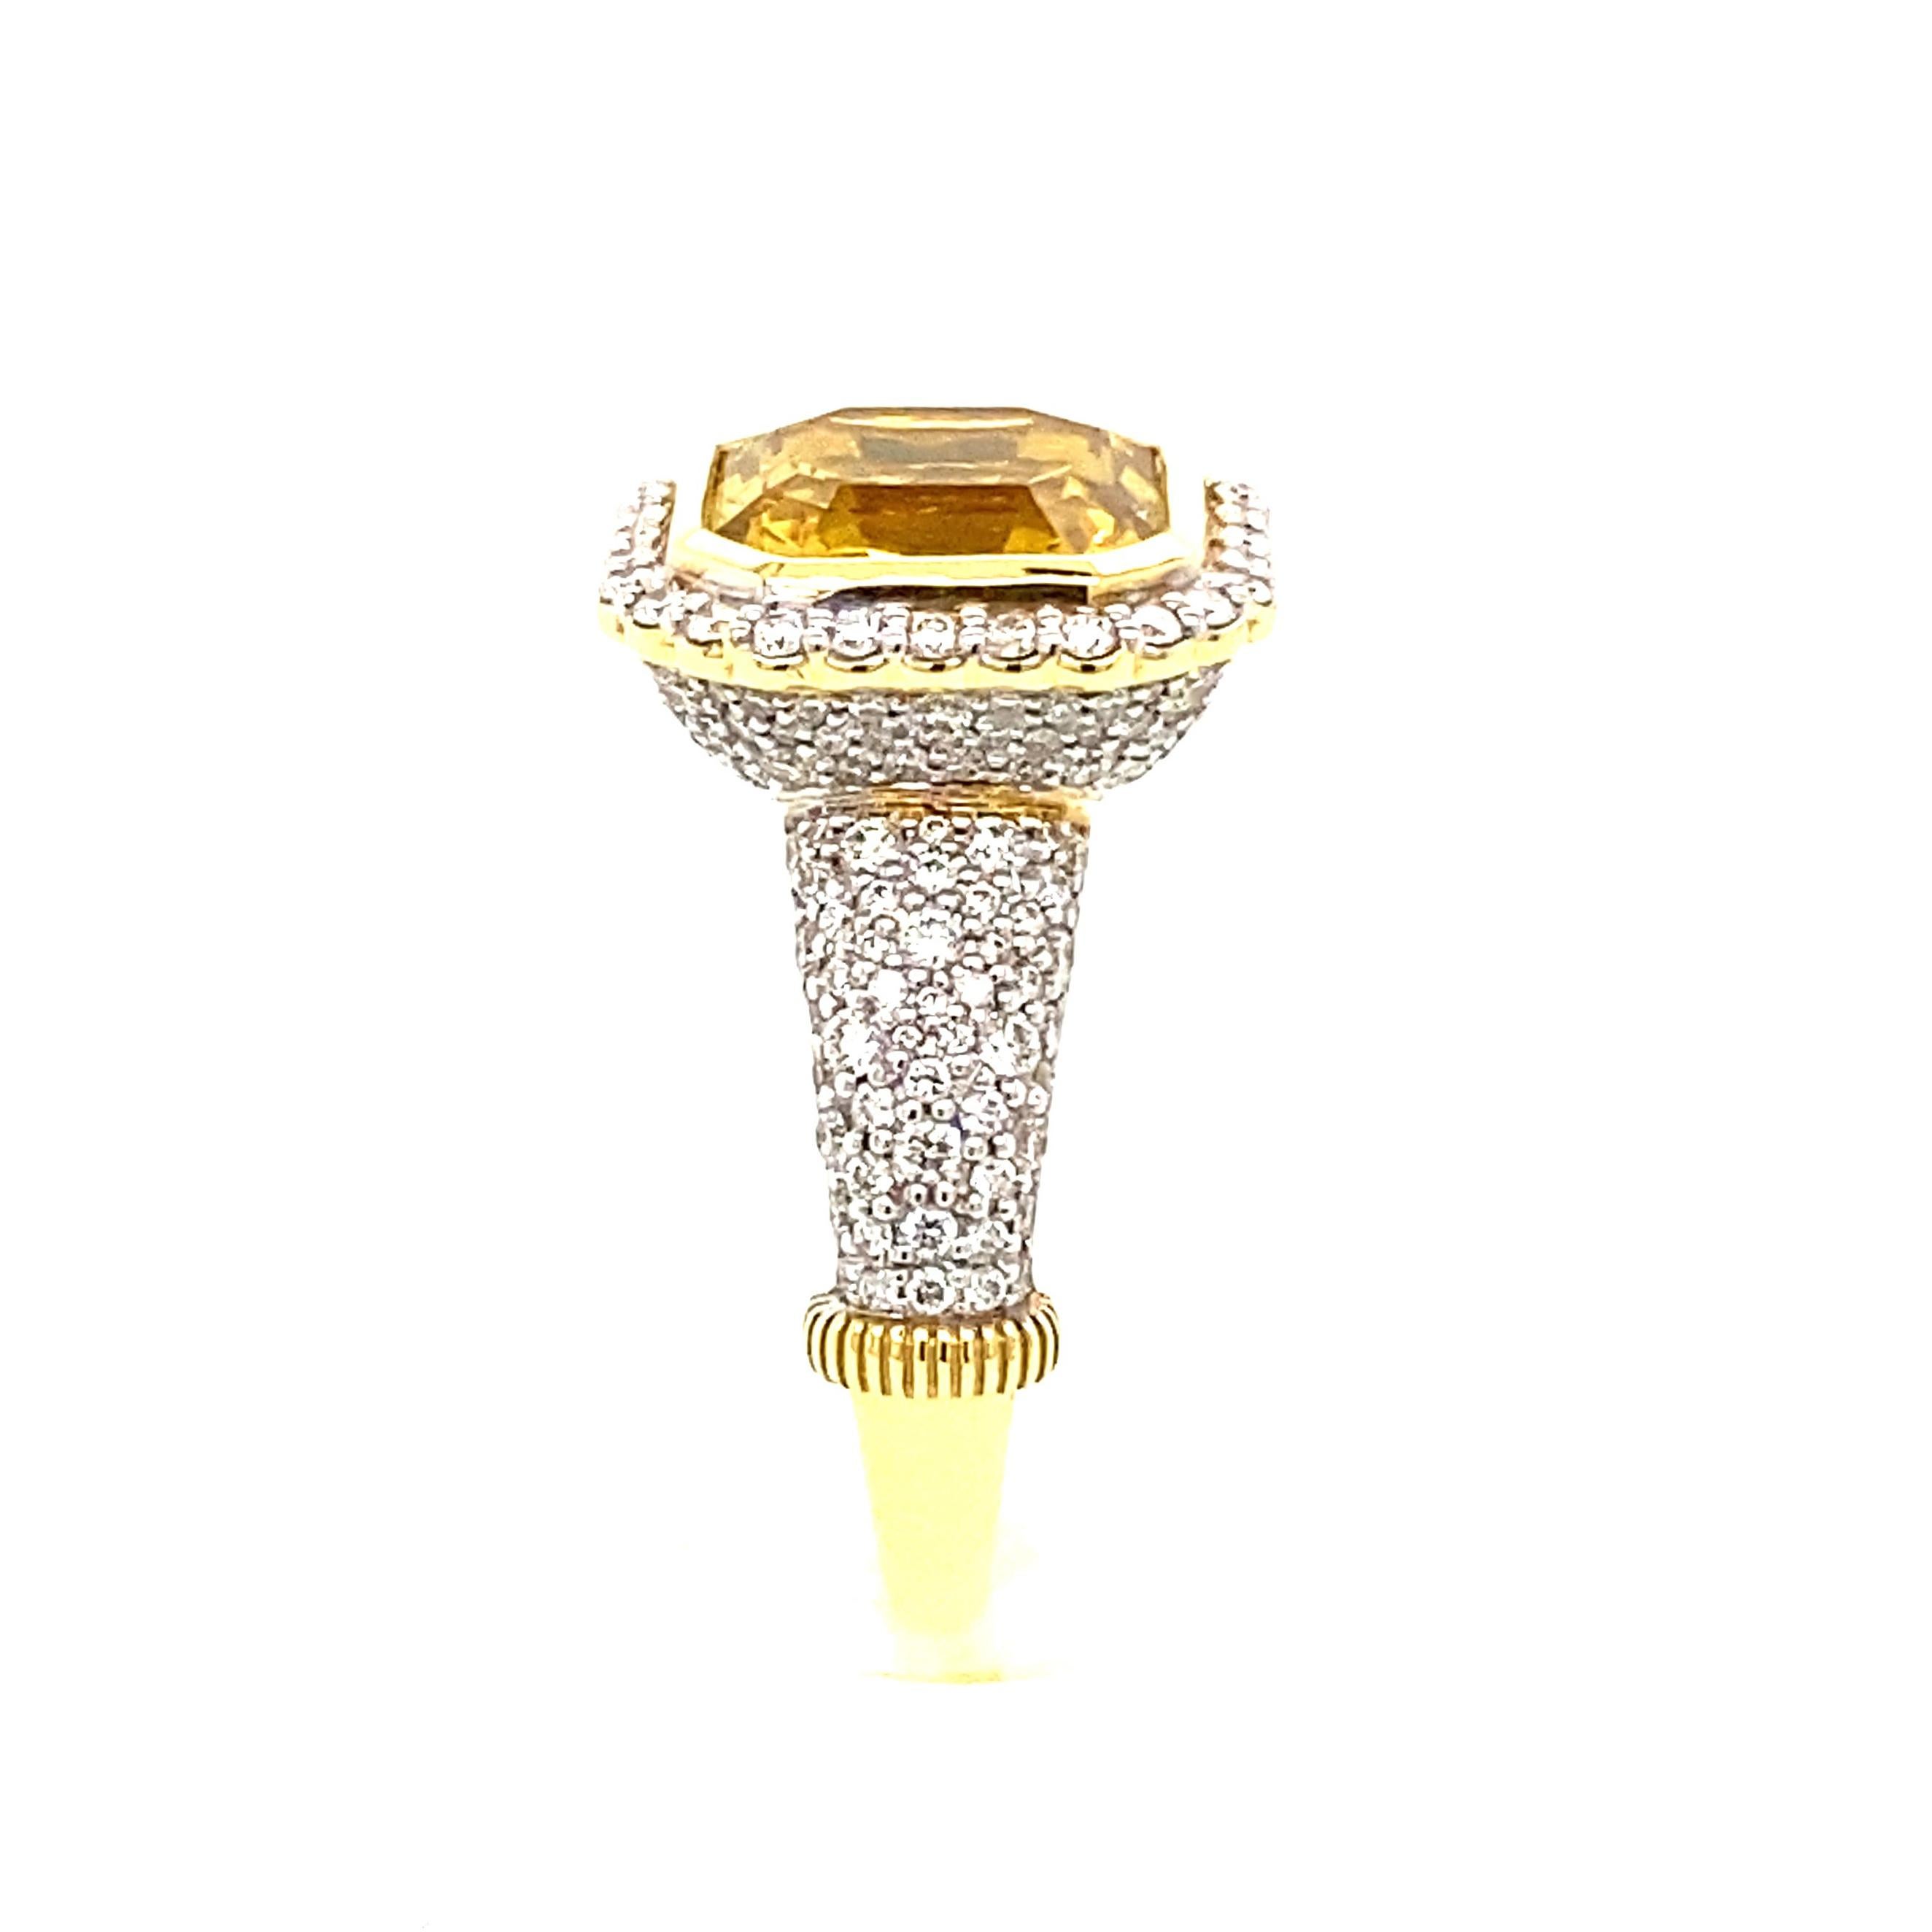 Asscher Cut Sloane Street One-of-a-Kind Yellow Beryl Cocktail Ring For Sale